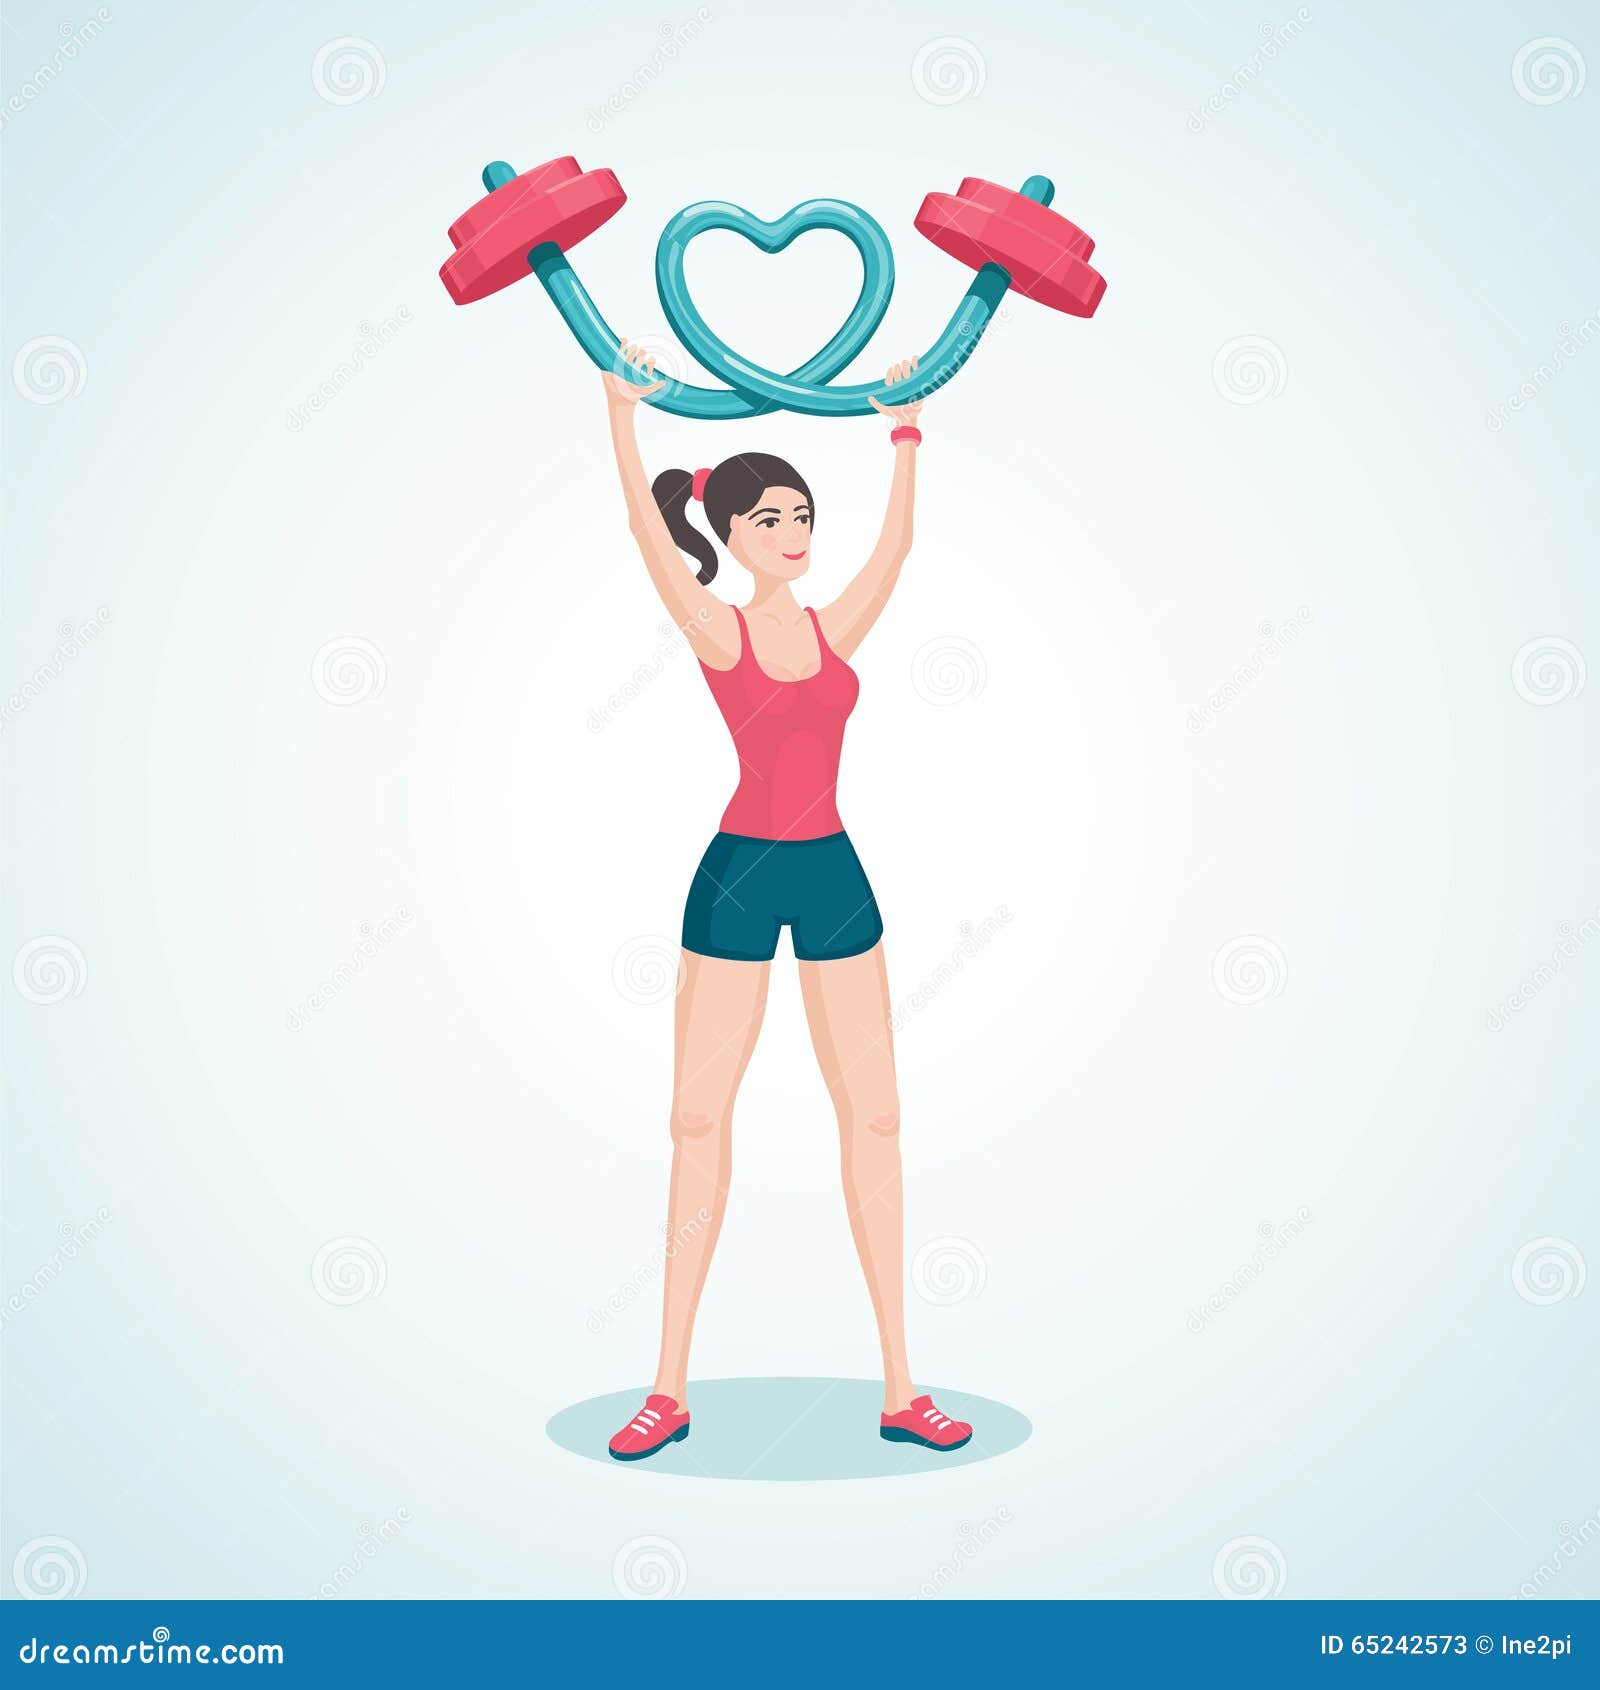 Silhouette Woman Lifting Weights Stock Illustrations - 125 Silhouette Woman...